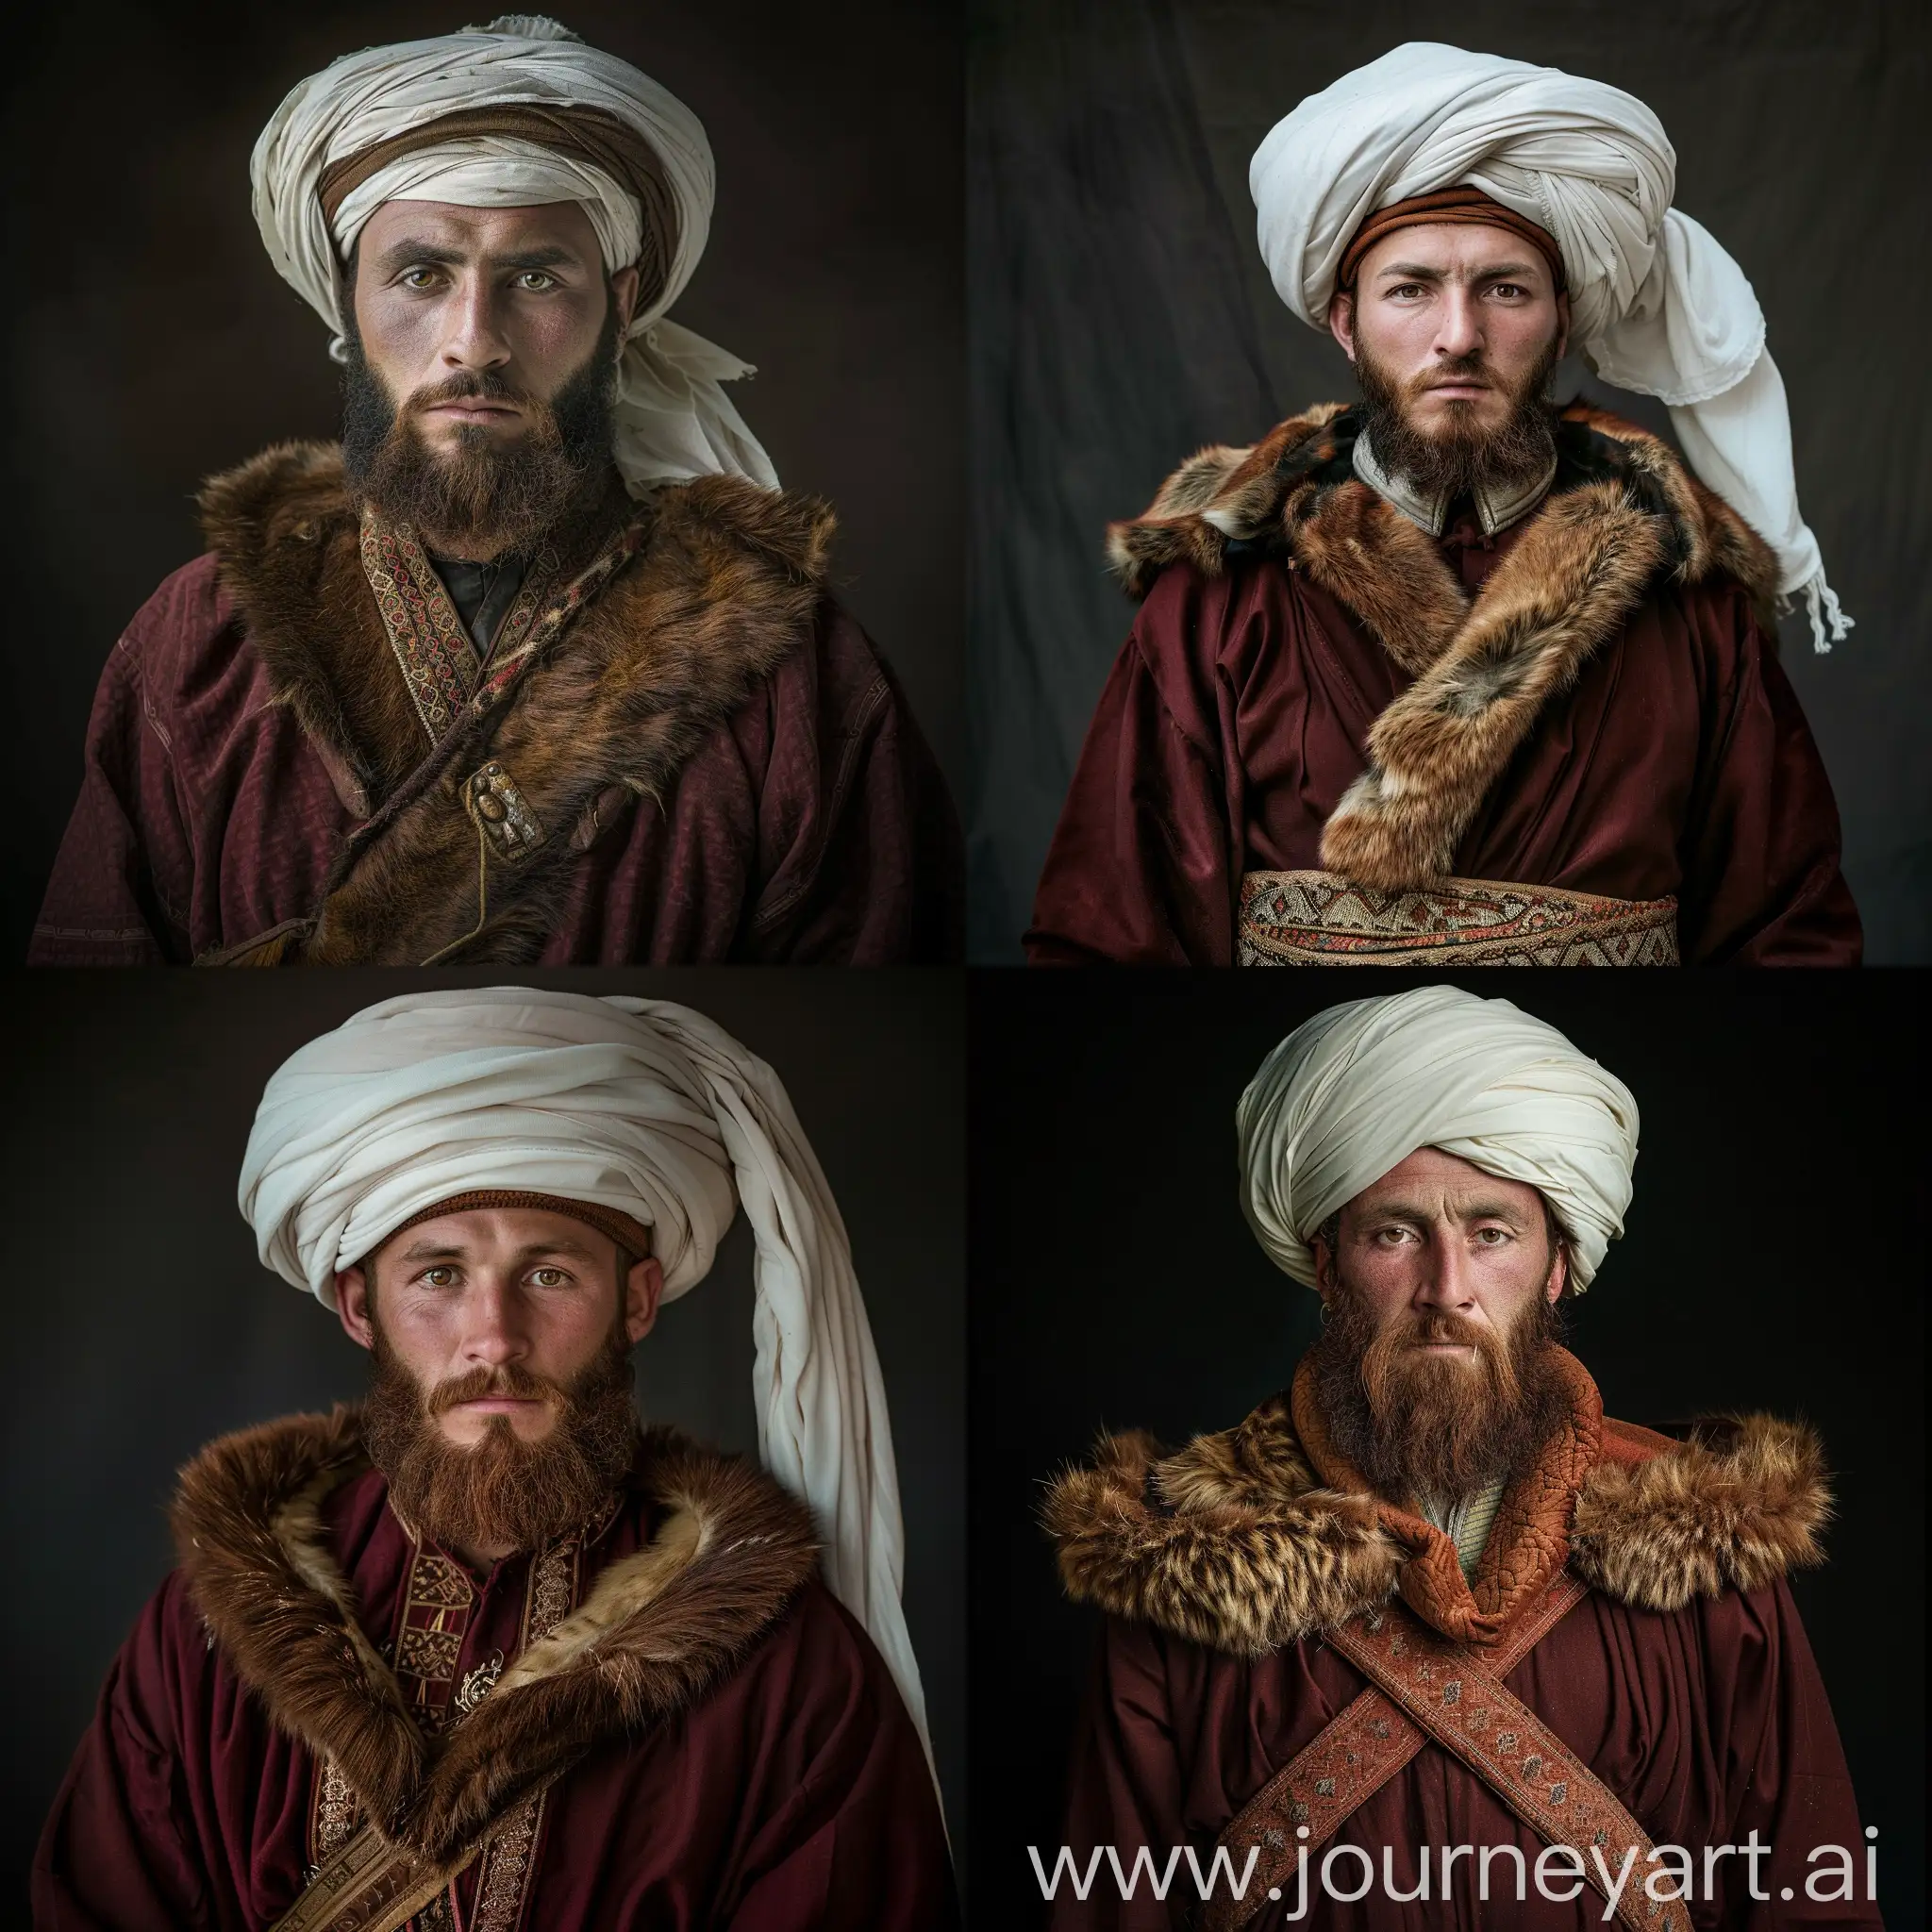 Portrait of 30 years old Pashtun warrior chief with traditional Afghan attire, full body front pose, wearing dark red garment with brown fur collars, brown average beard, curved Pashtun nose, pale skin, white turban and rest of turban hanging , glorious, charismatic leader, cinematic lighting